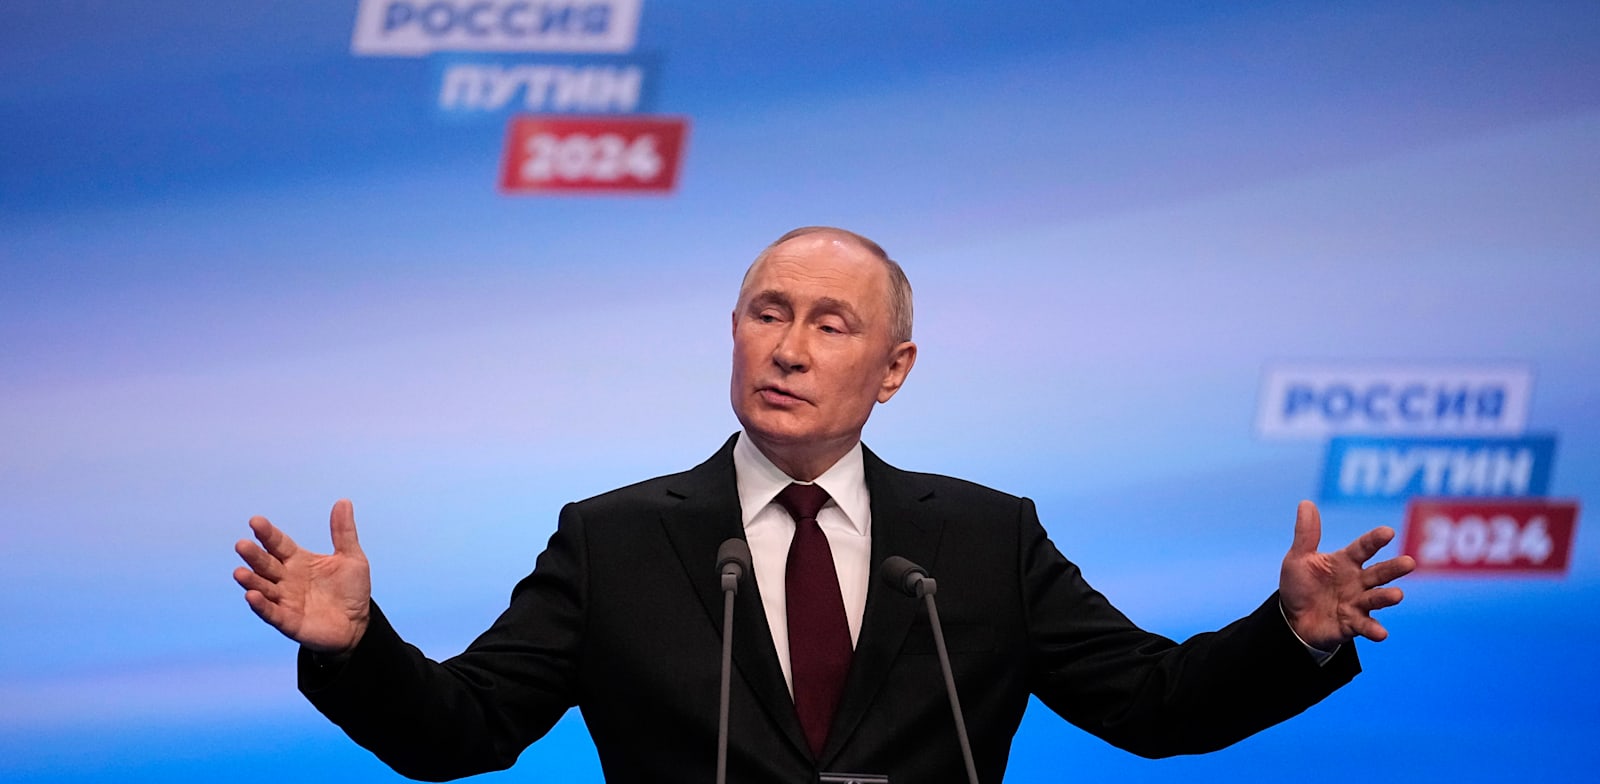 What lies ahead for Russia after Putin’s fifth presidential election victory?